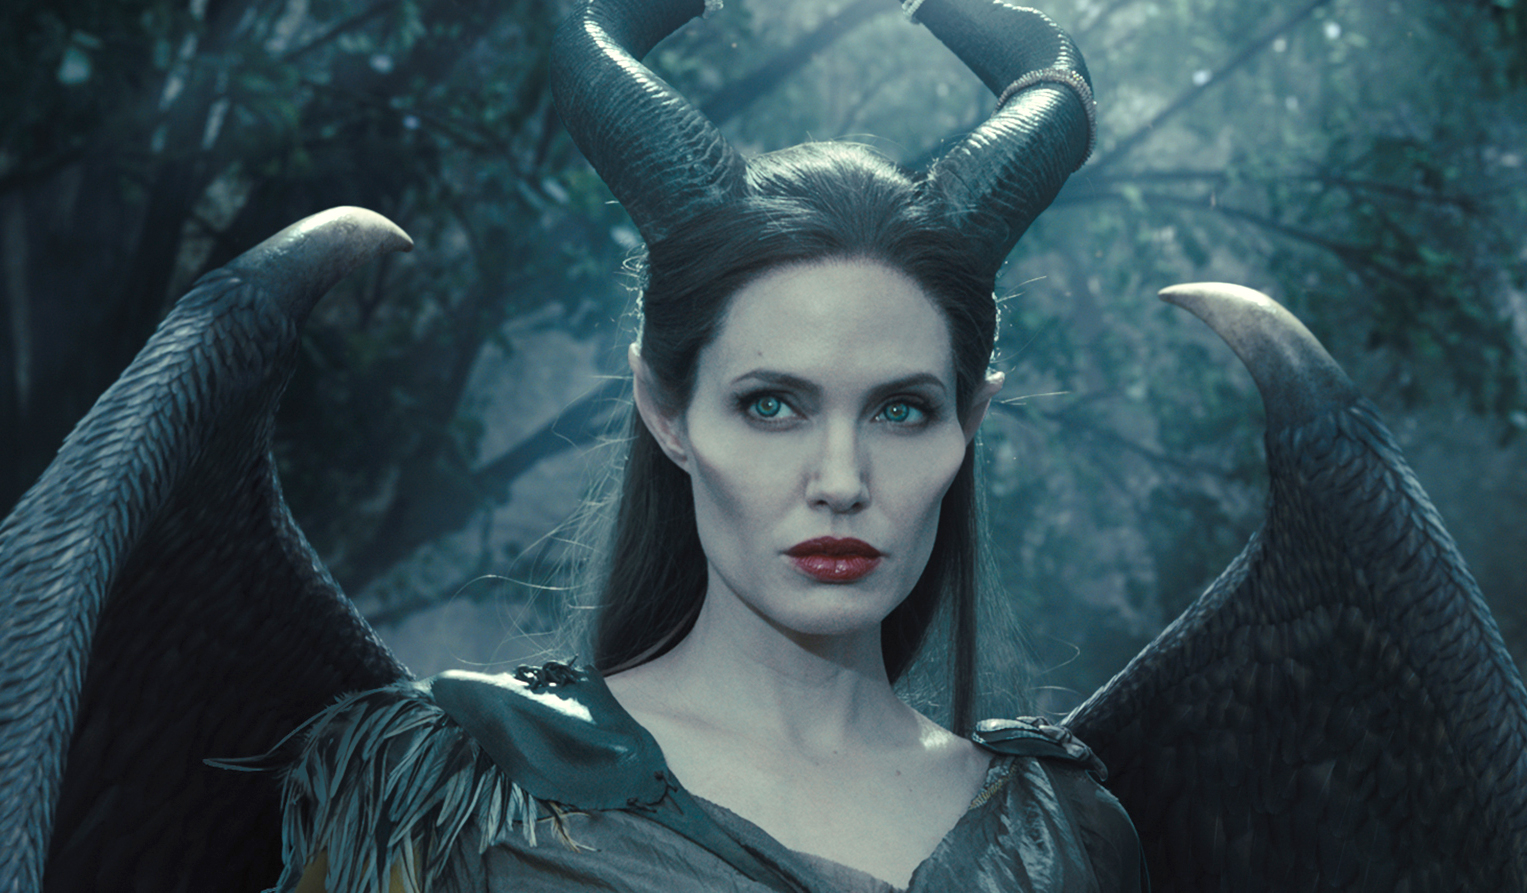 Her starring turn in Maleficent impressed even those who were not previously her fans, giving Angelina Jolie her most financially successful film of her career. What’s more, she finally tied the knot with longtime love and father of her children, Brad Pitt. Global Box Office: $758 million Pictured: Angelina Jolie in Maleficent. Photo credit: Walt […]